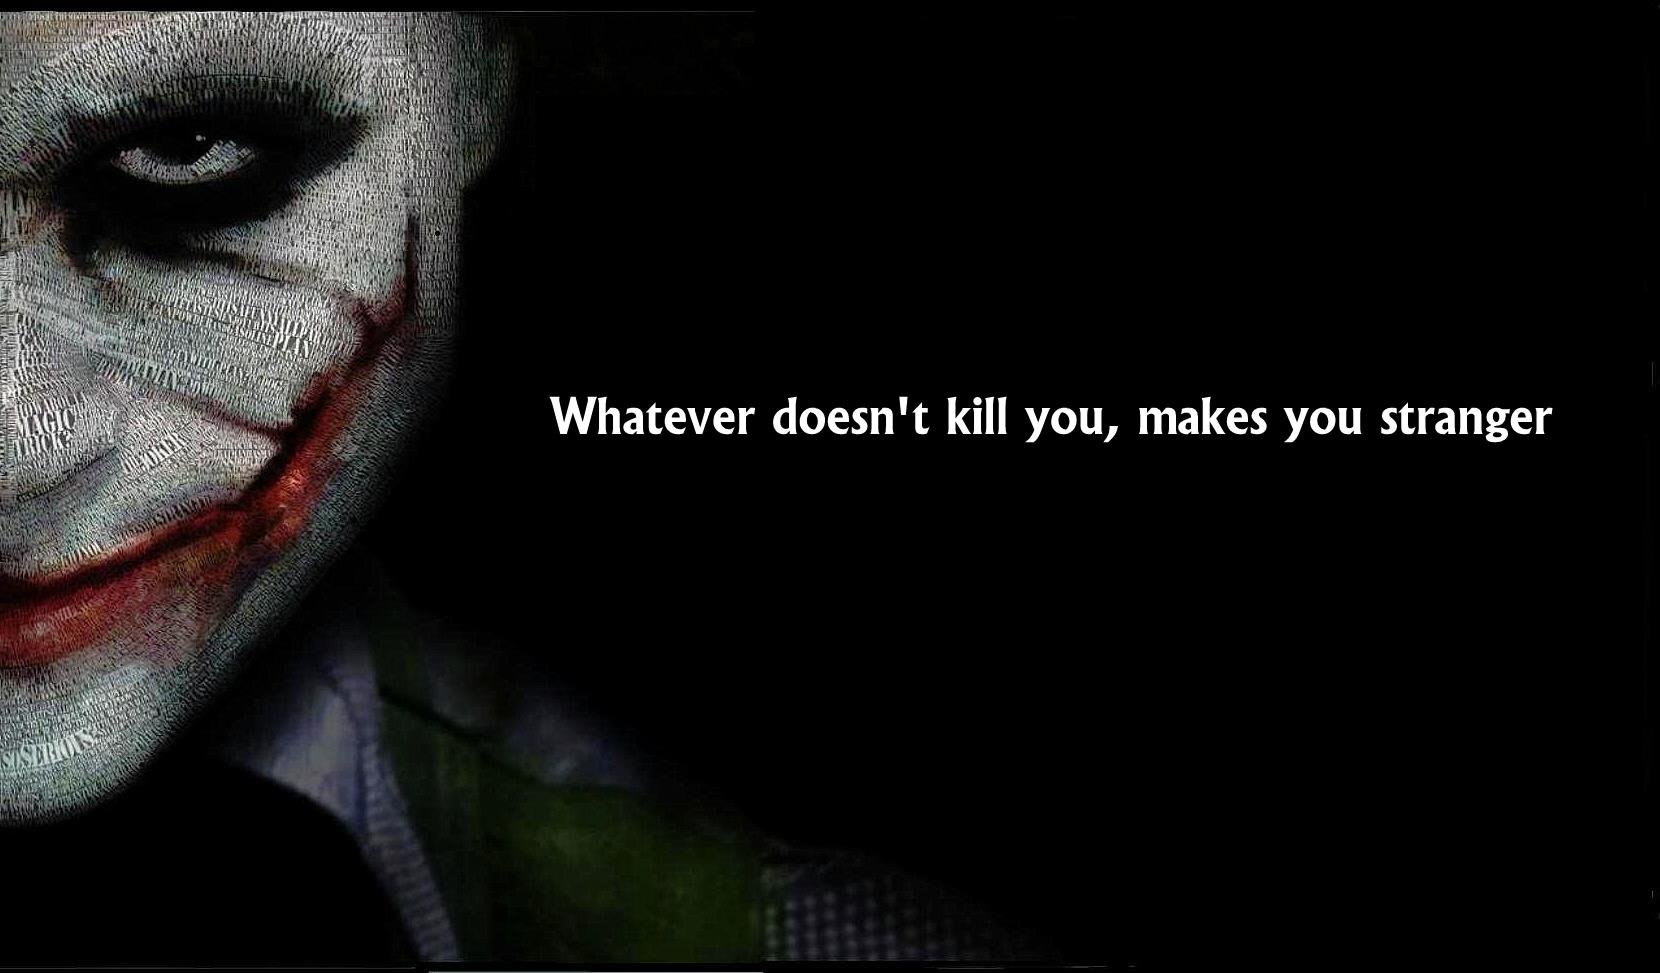 Whatever doesn't kill you.